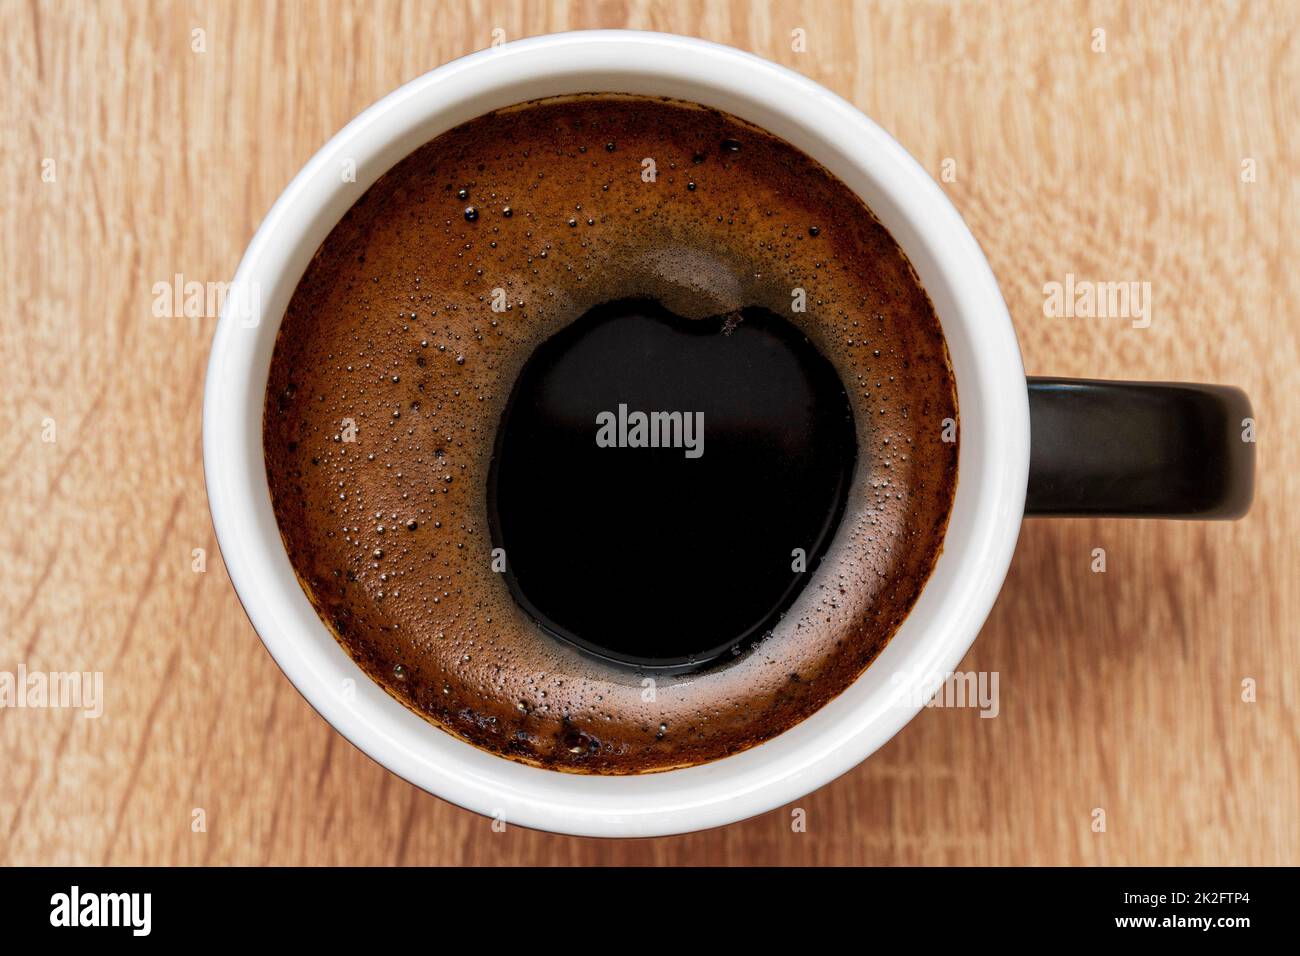 Top view of a ceramic cup of black coffee Stock Photo